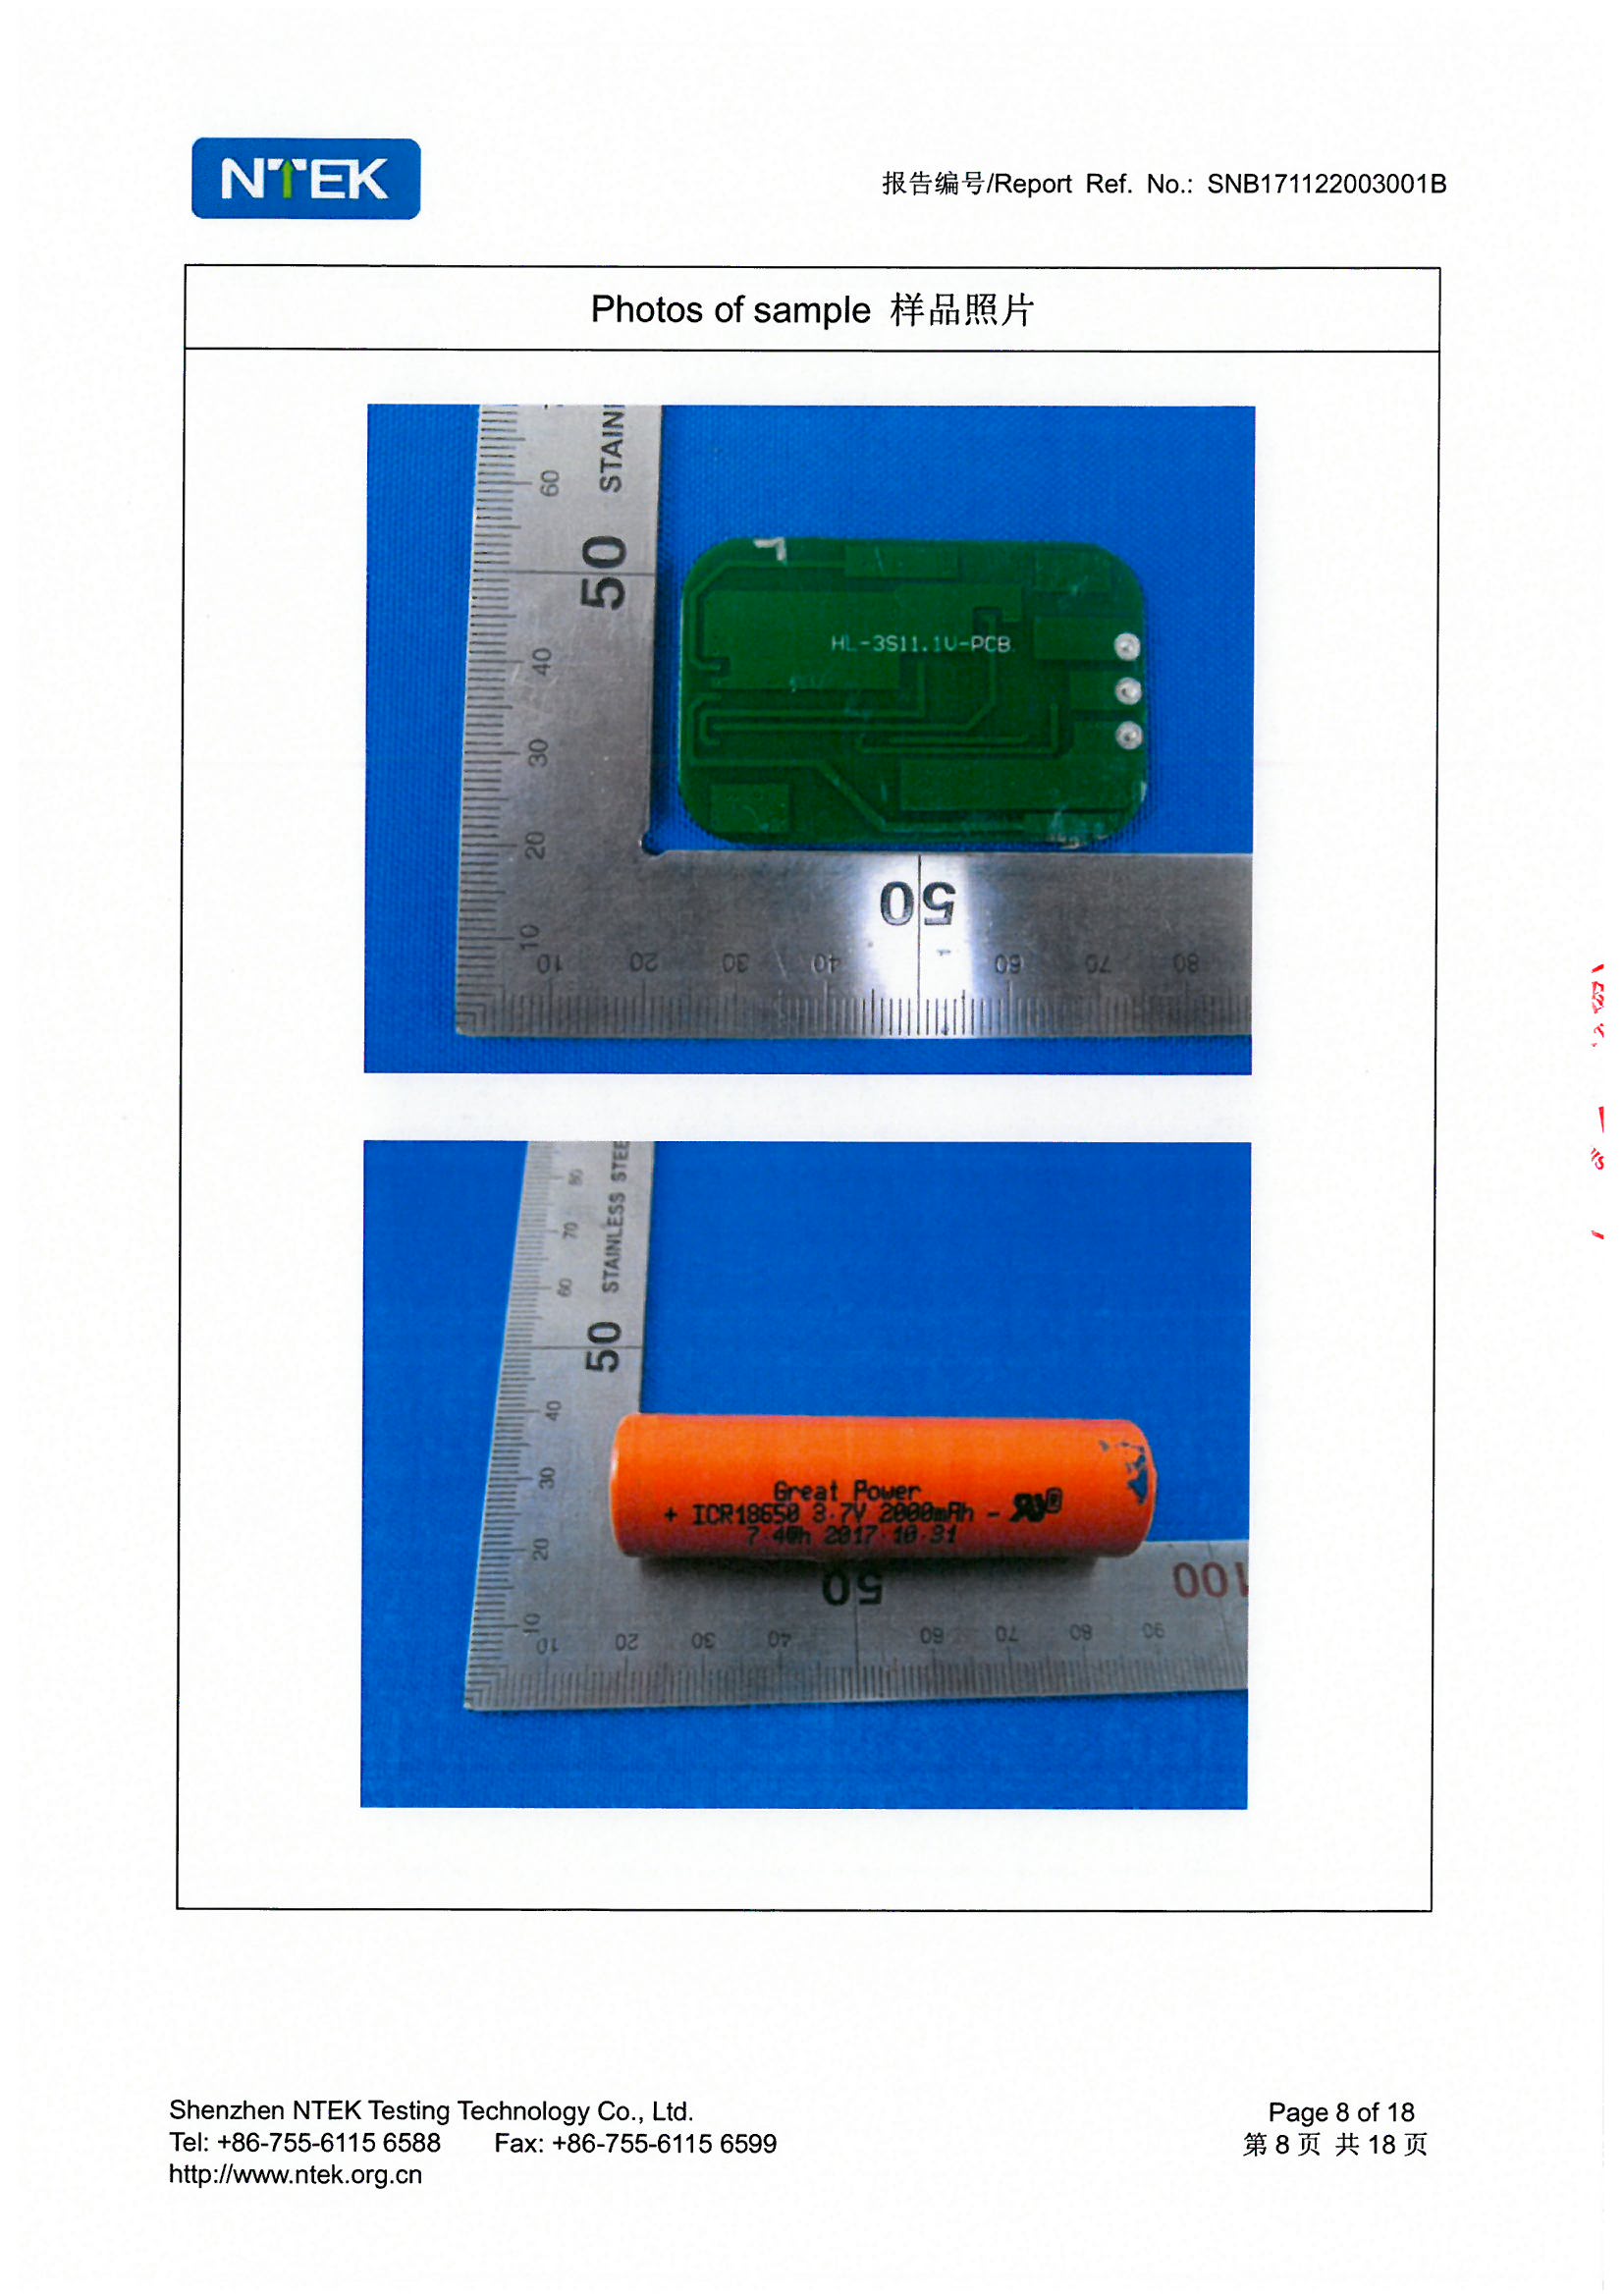 A&S Power 18650-11.1V-4000mAh Lithium Ion Battery UN38.3 Test Report